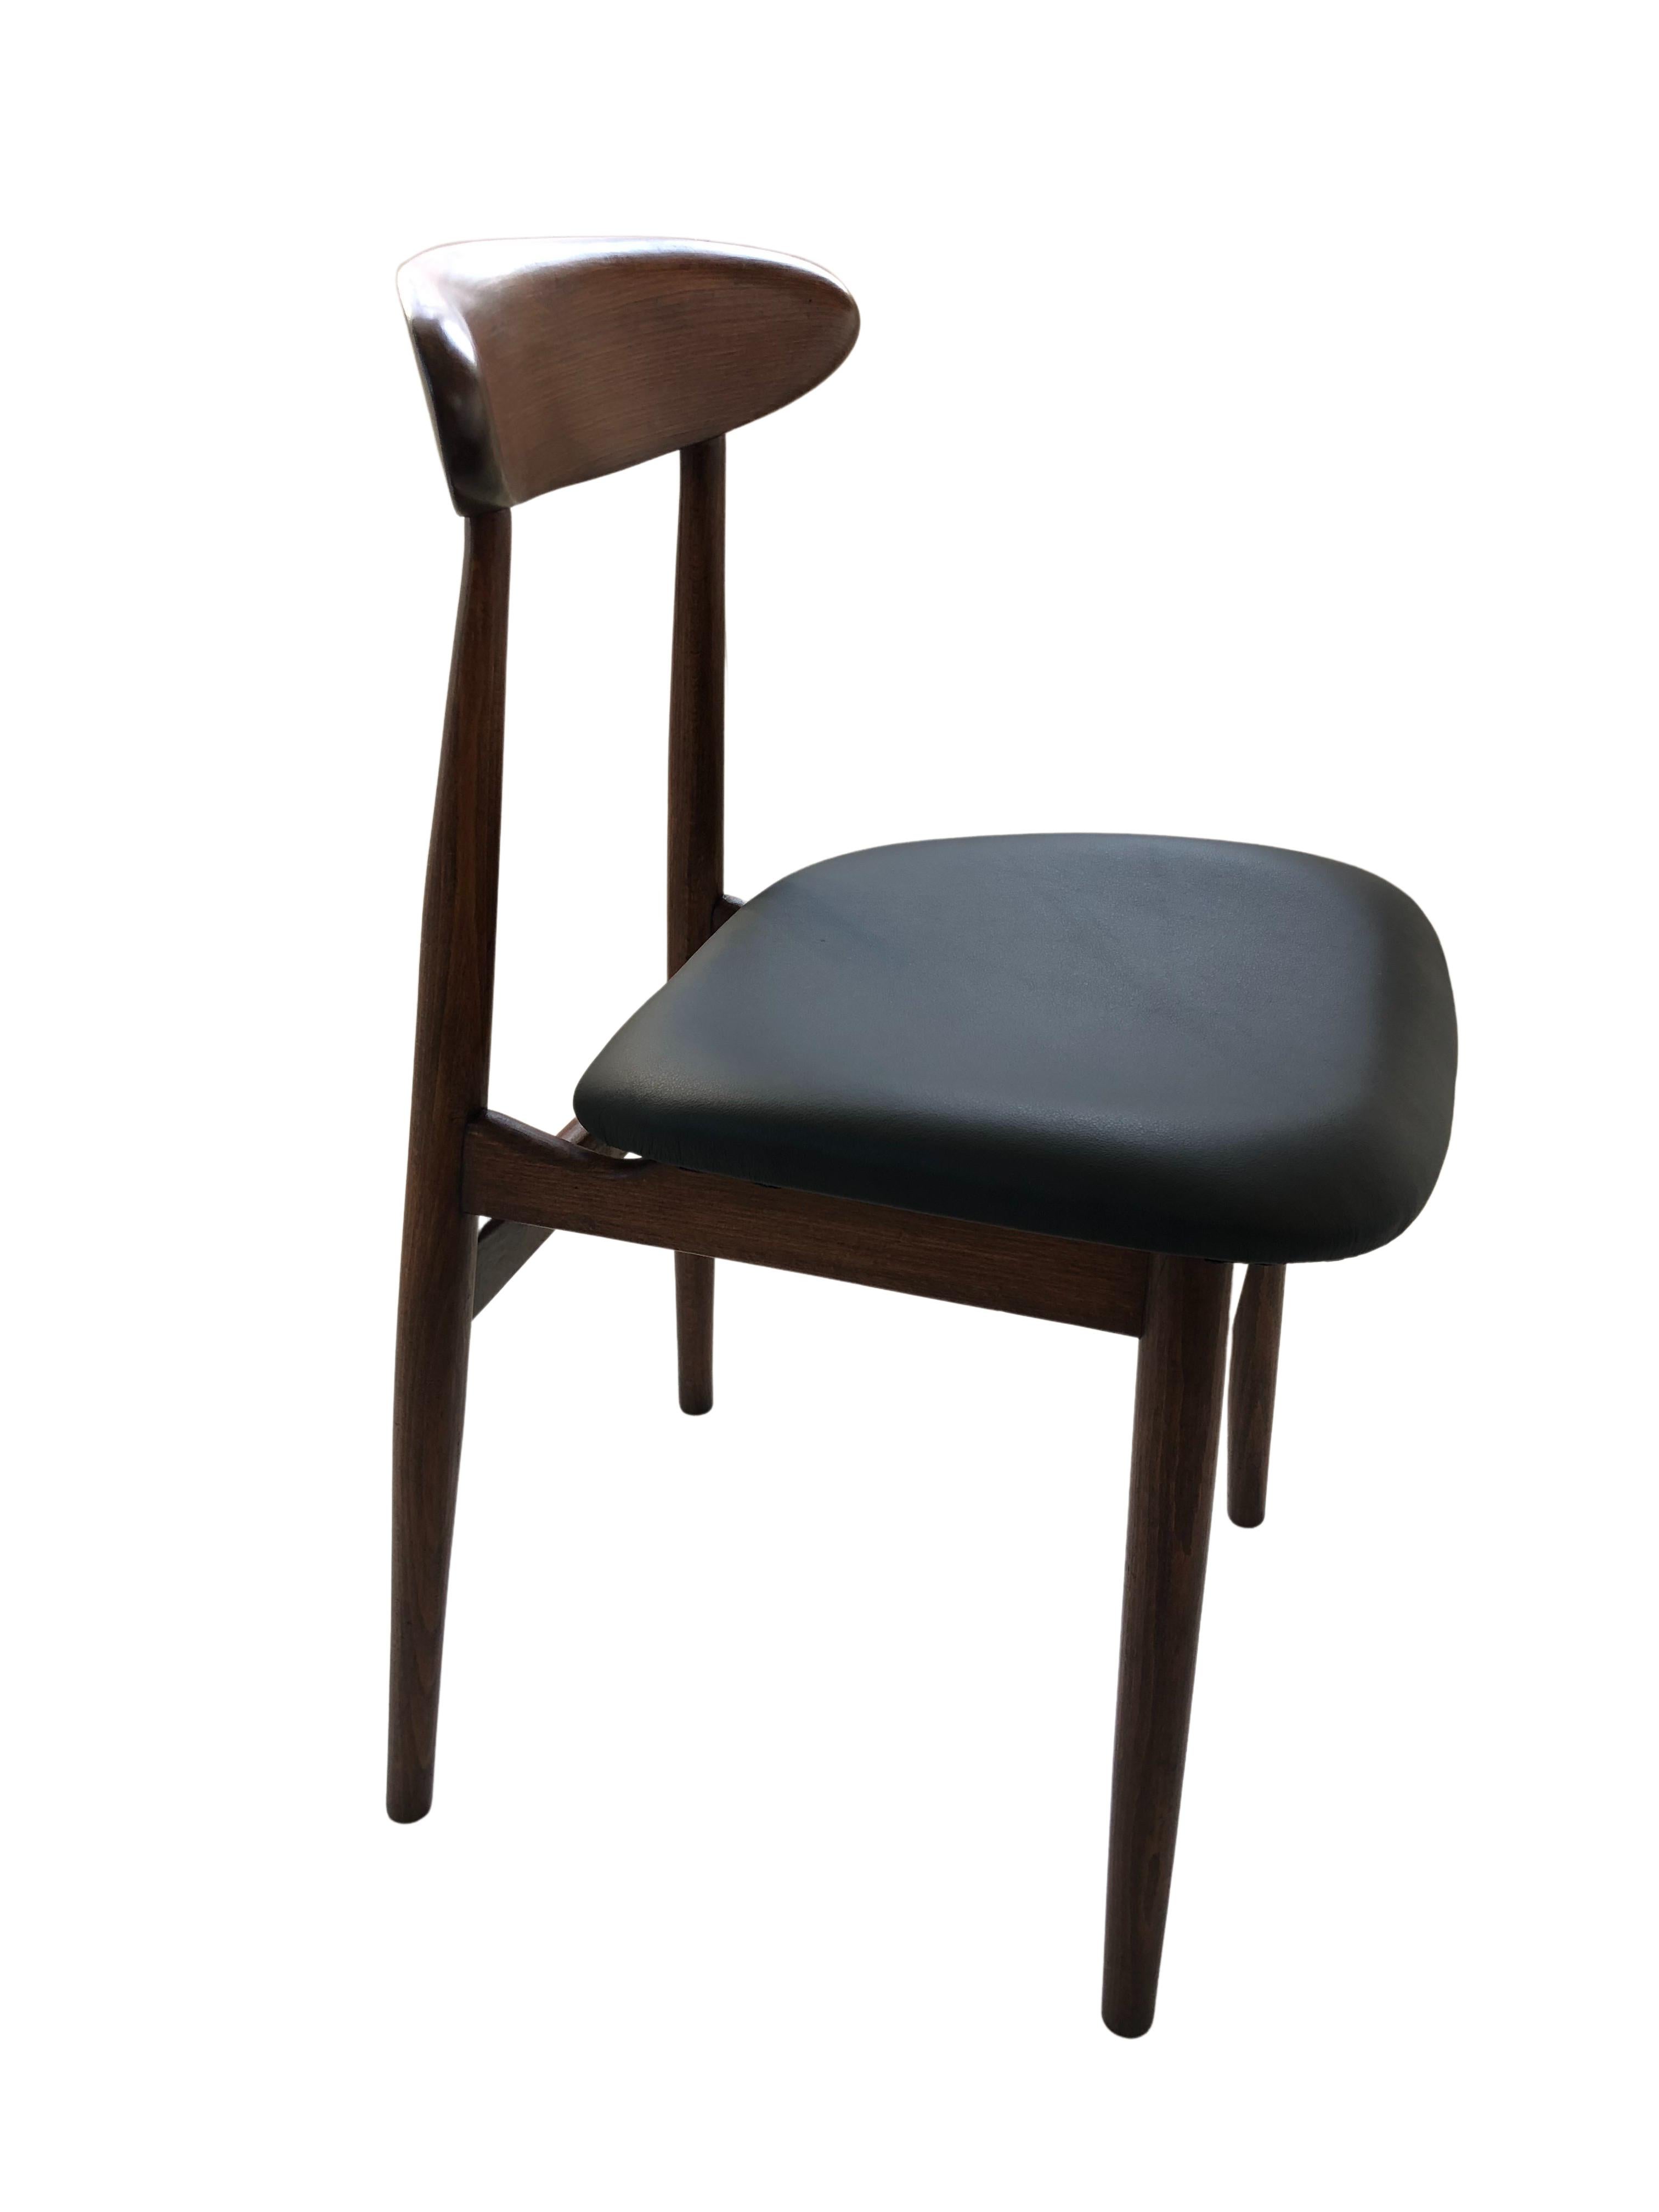 Set of two chairs model 5908, designed by Rajmund Teofil Halas, one of the most recognizable projects of Polish design in the 60s. The chairs have a simple, modernist silhouette. The structure is made of solid beechwood in a warm walnut color,